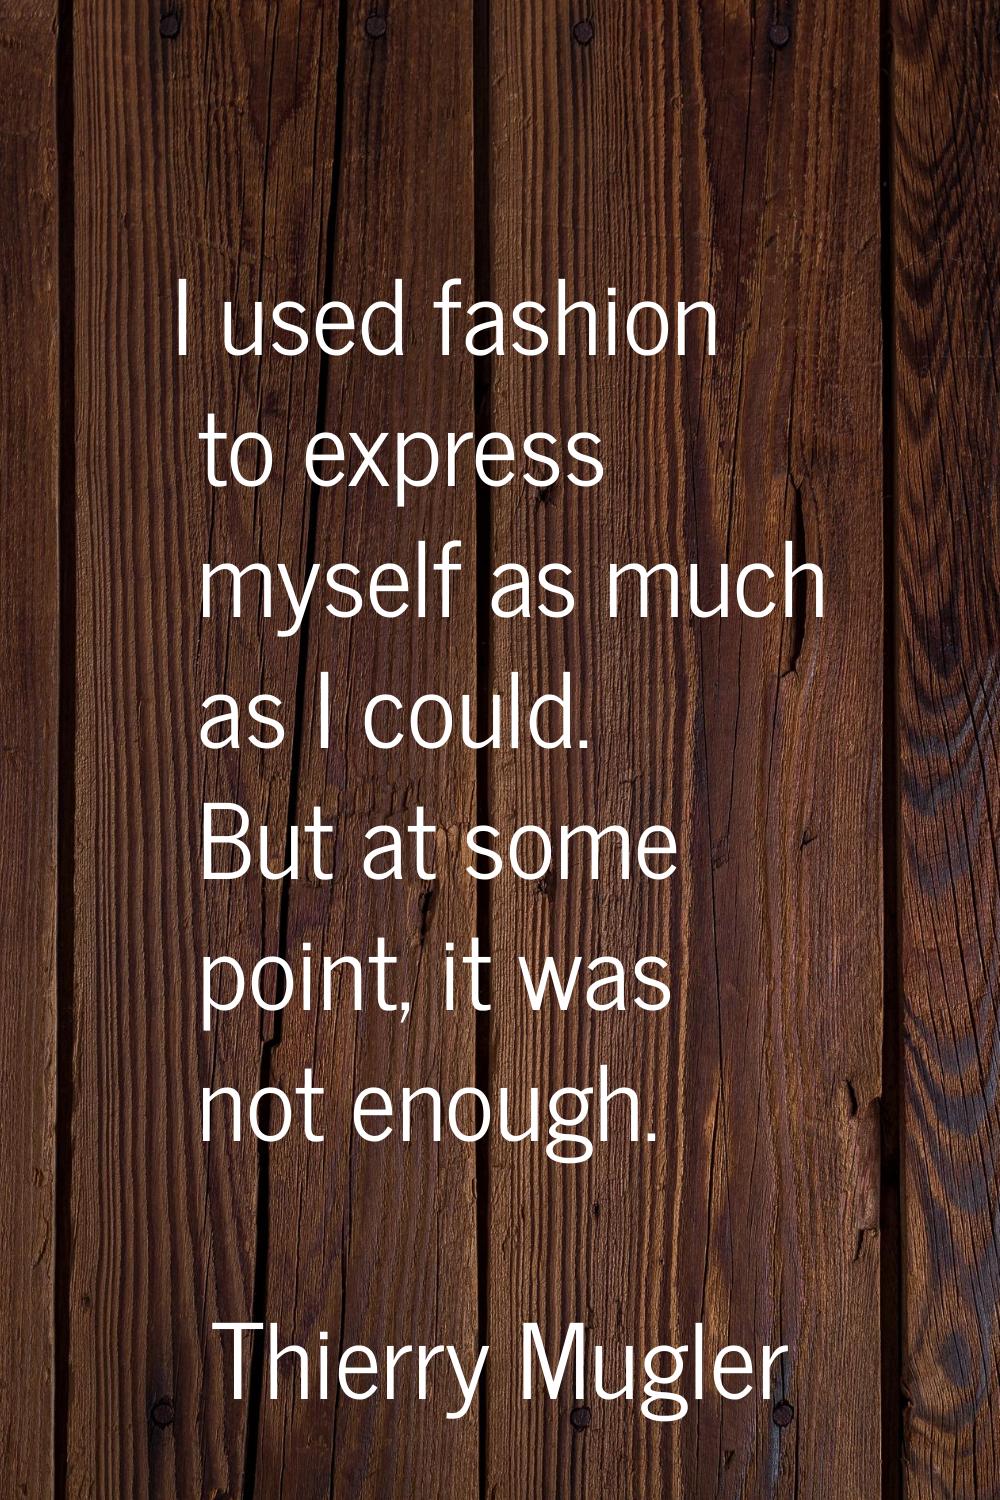 I used fashion to express myself as much as I could. But at some point, it was not enough.